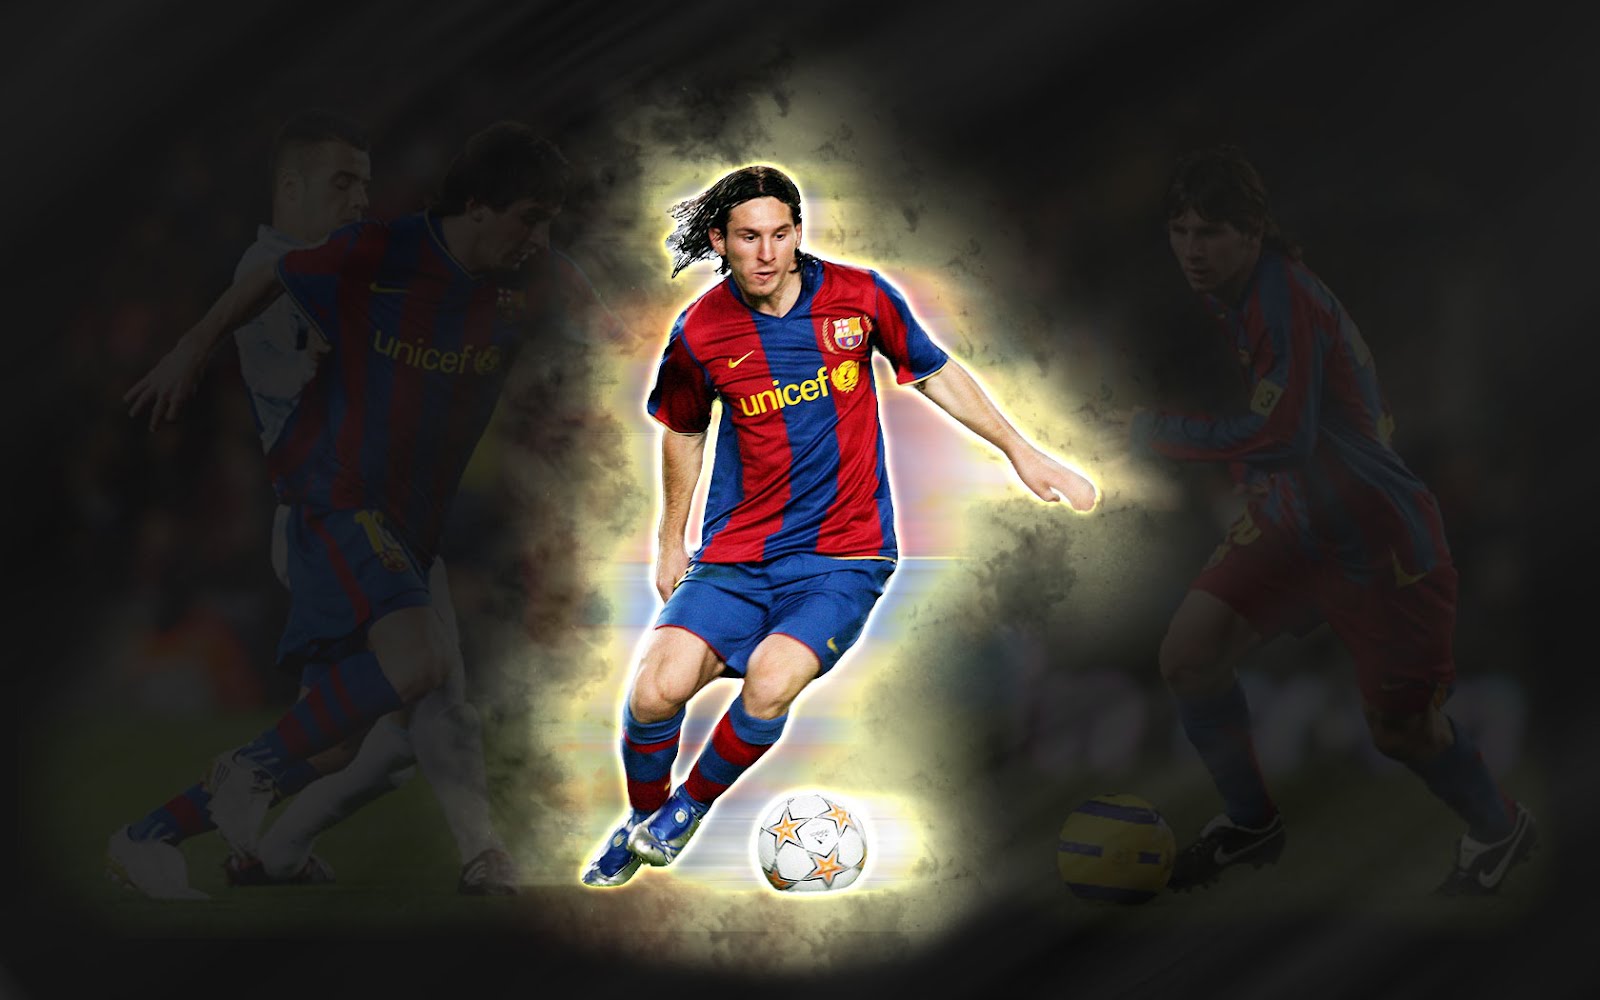 Messi Wallpapers,image,pictures,HD,wallpapers